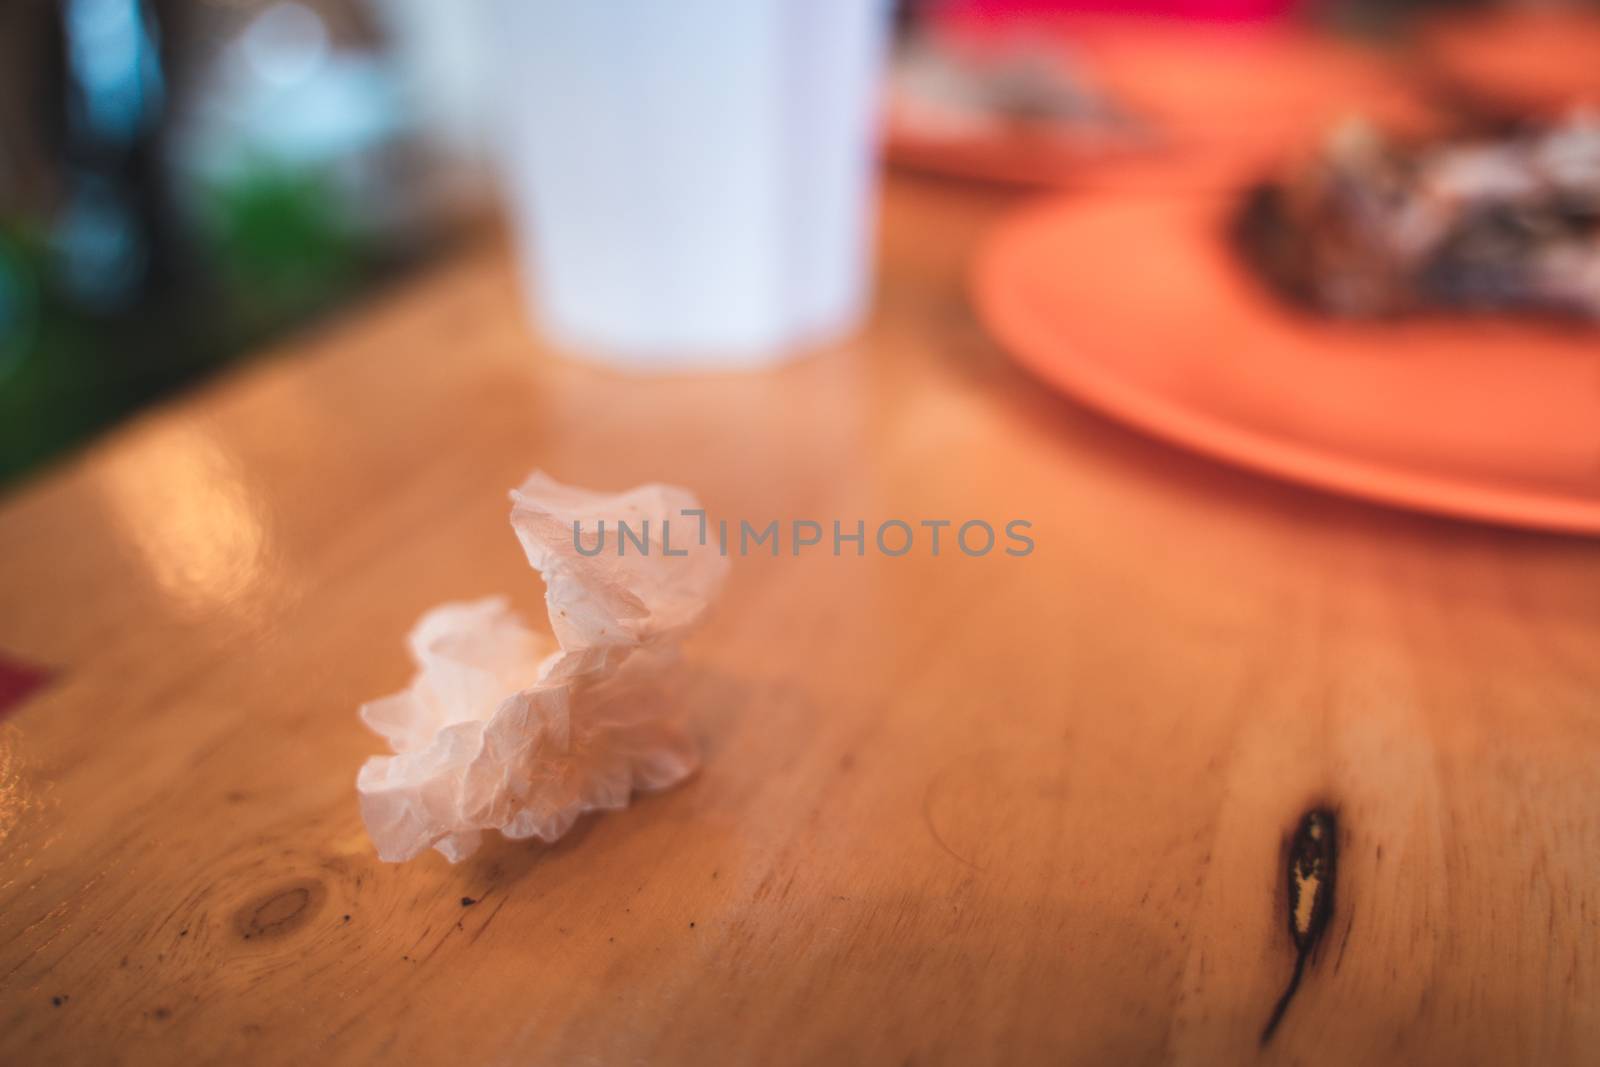 Used Tissue on the food table with blur background by peerapixs